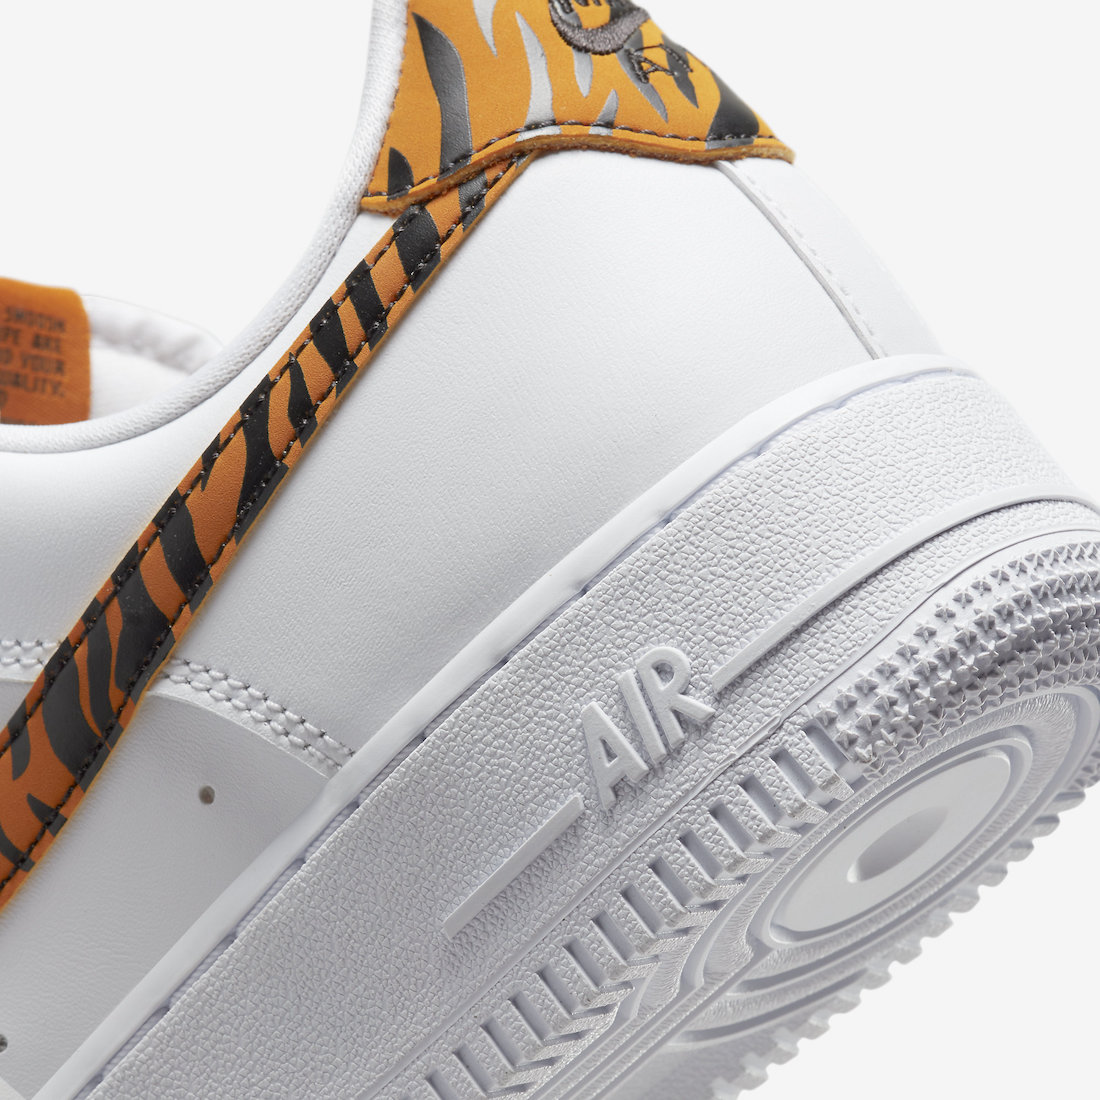 Nike Air Force 1 Low Tiger Stripes DD8959-108 Release Date Info